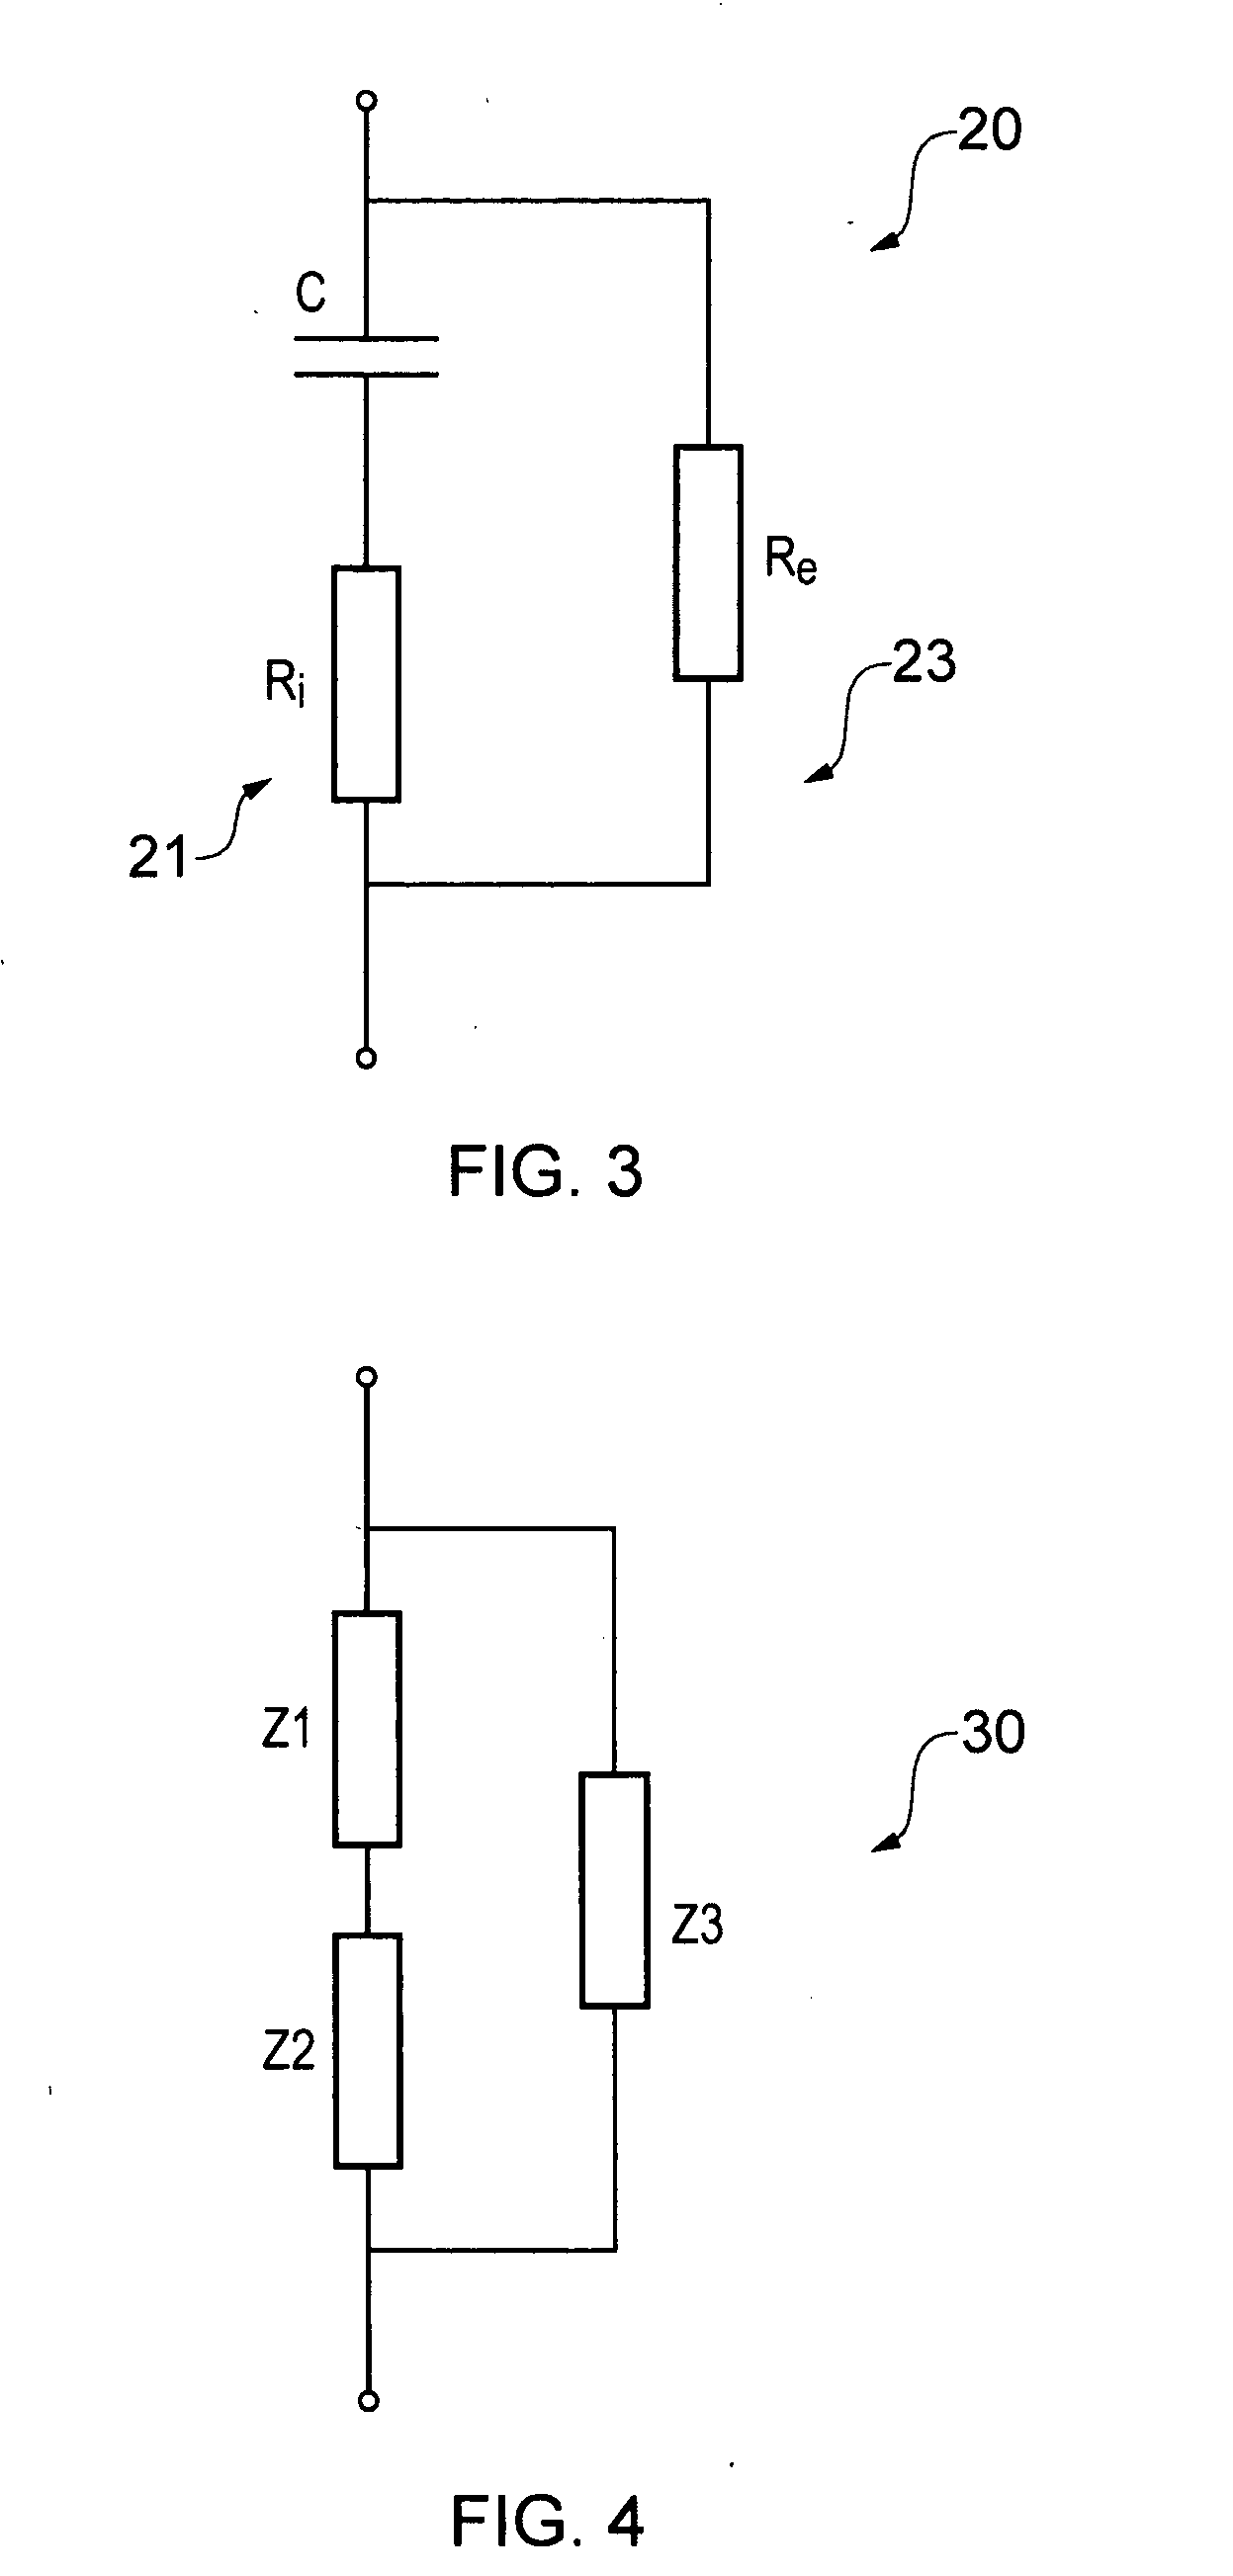 Method for analyzing the structure of an electrically conductive object